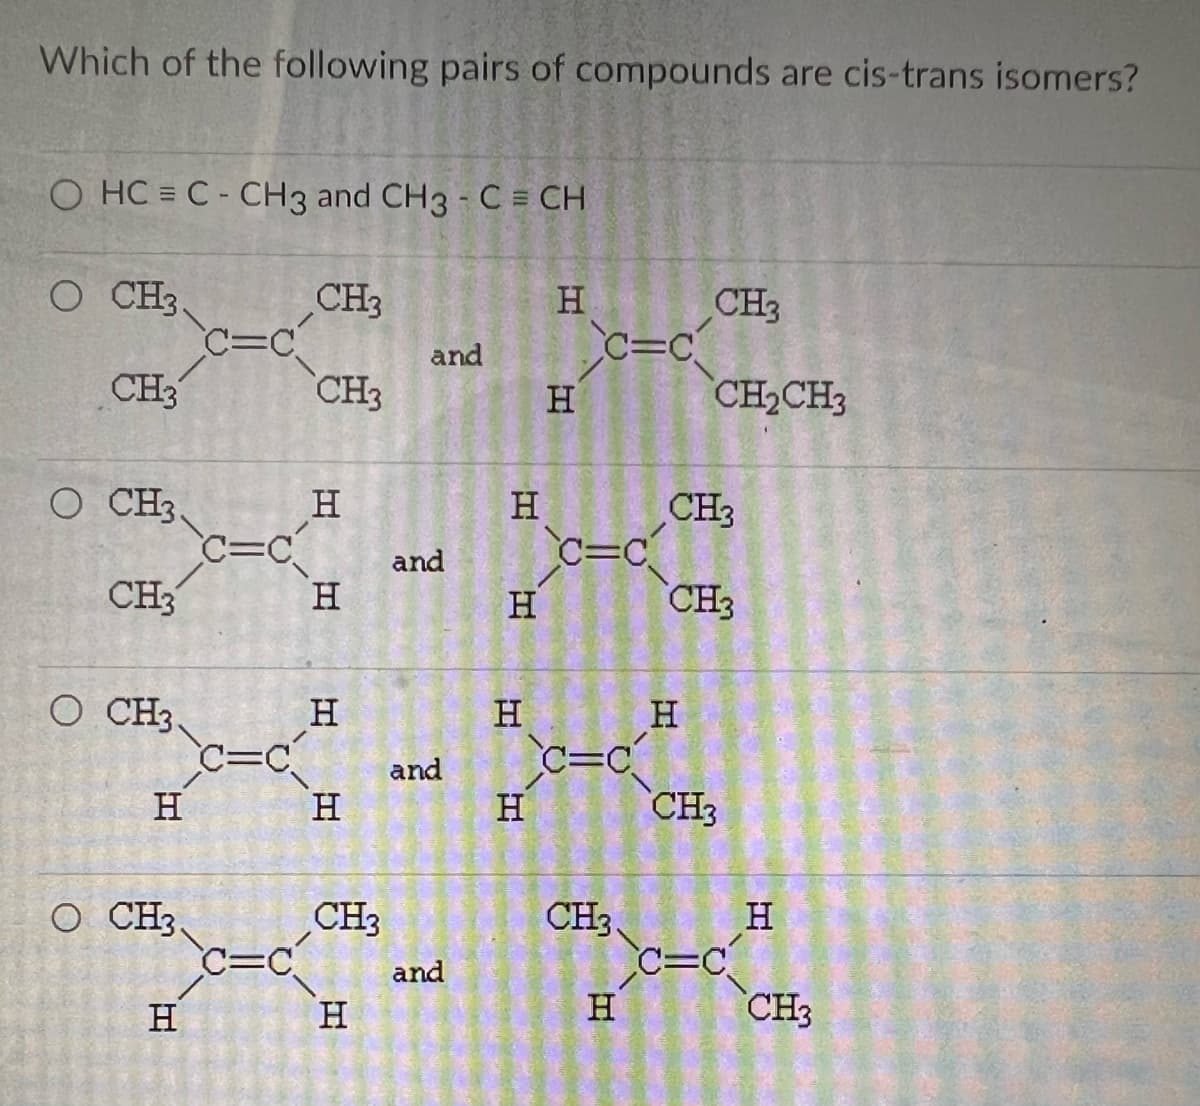 Which of the following pairs of compounds are cis-trans isomers?
O HC = C- CH3 and CH3 - C = CH
O CH3,
CH3
O CH3.
CH3
O CH3,
H
O CH3,
H
C=C
C=C
C=C
C=C
Com
CH3
CH3
H
H
H
H
CH3
H
DESA
and
and
and
and
H
H
H
H
H
H
c=c
C=C₁
c=c
CH₂
H
CH3
CH₂CH3
CH3
H
CH3
CH3
C=C
H
CH3